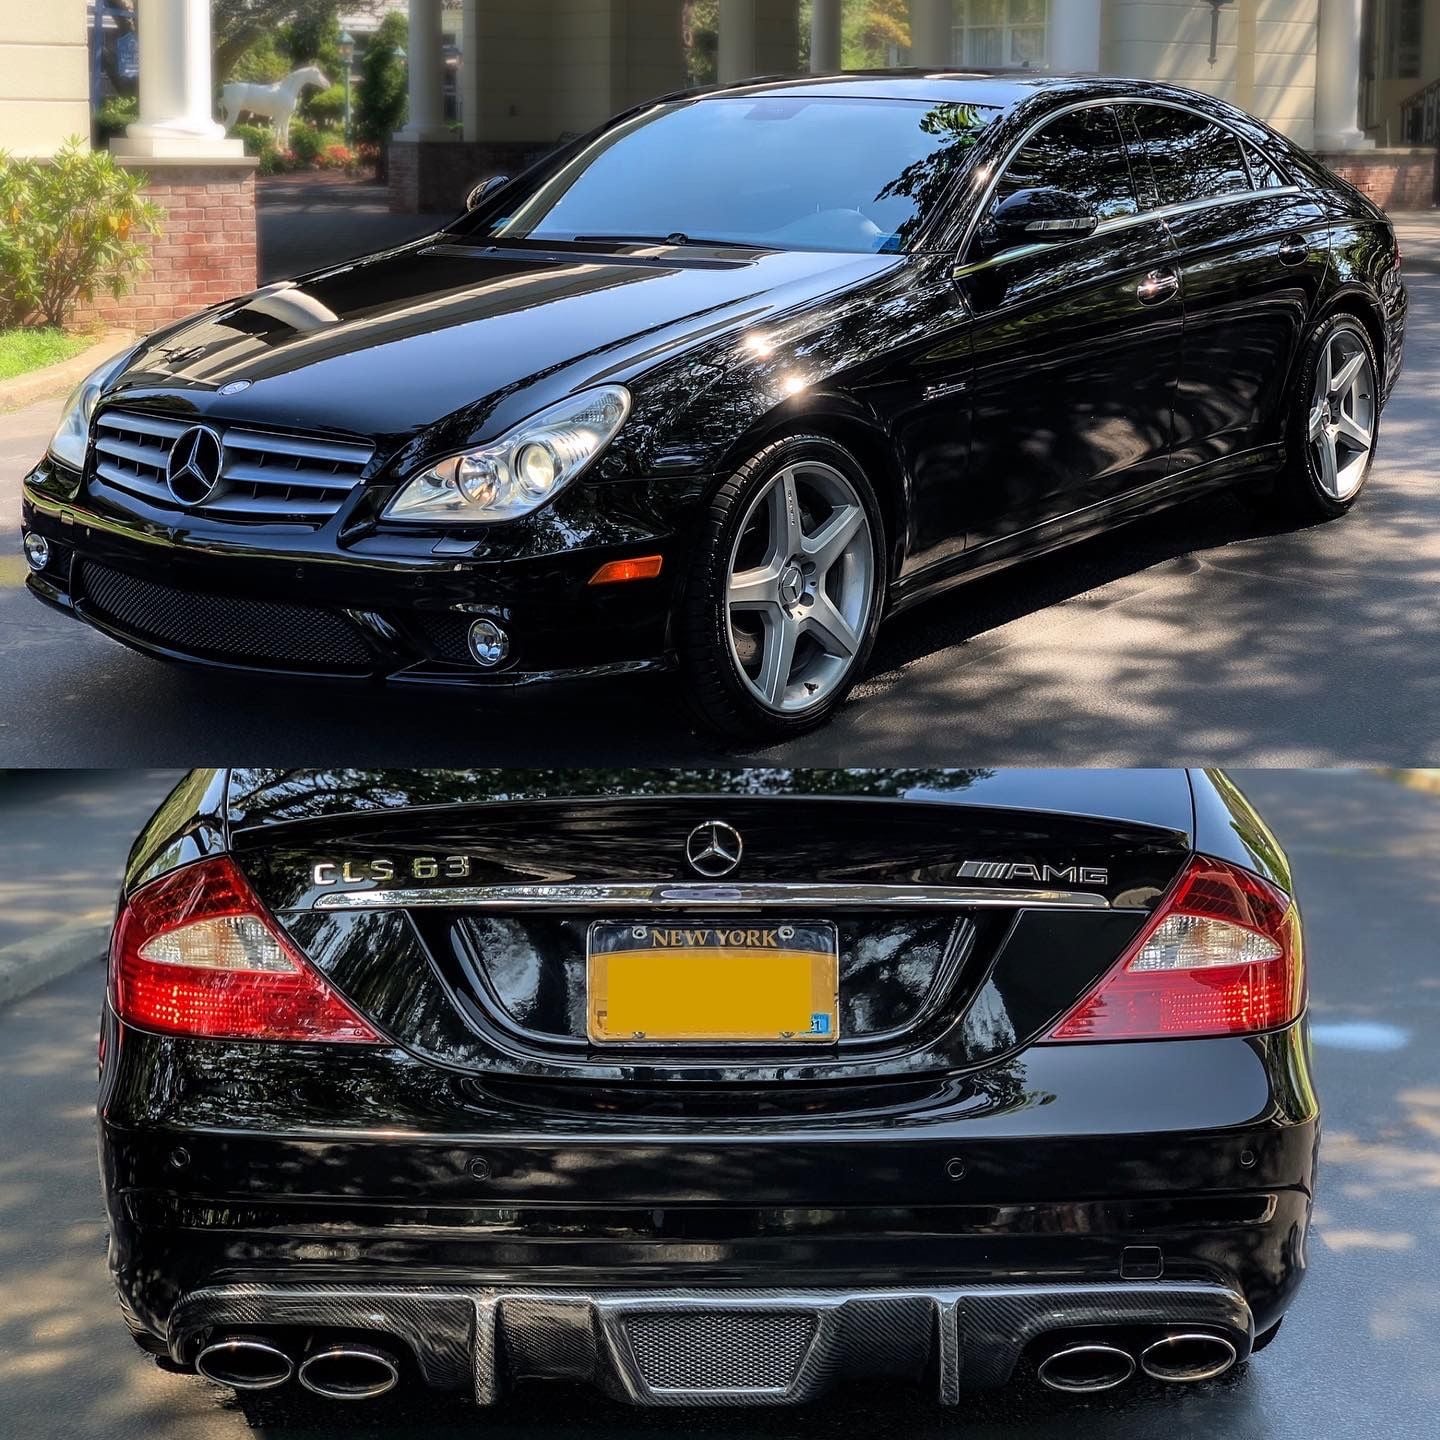 2008 Mercedes-Benz CLS63 AMG - 2 owner 2008 CLS63 AMG 69k miles - Used - VIN WDDDJ77X38A131736 - 69,800 Miles - Merrick, NY 11566, United States